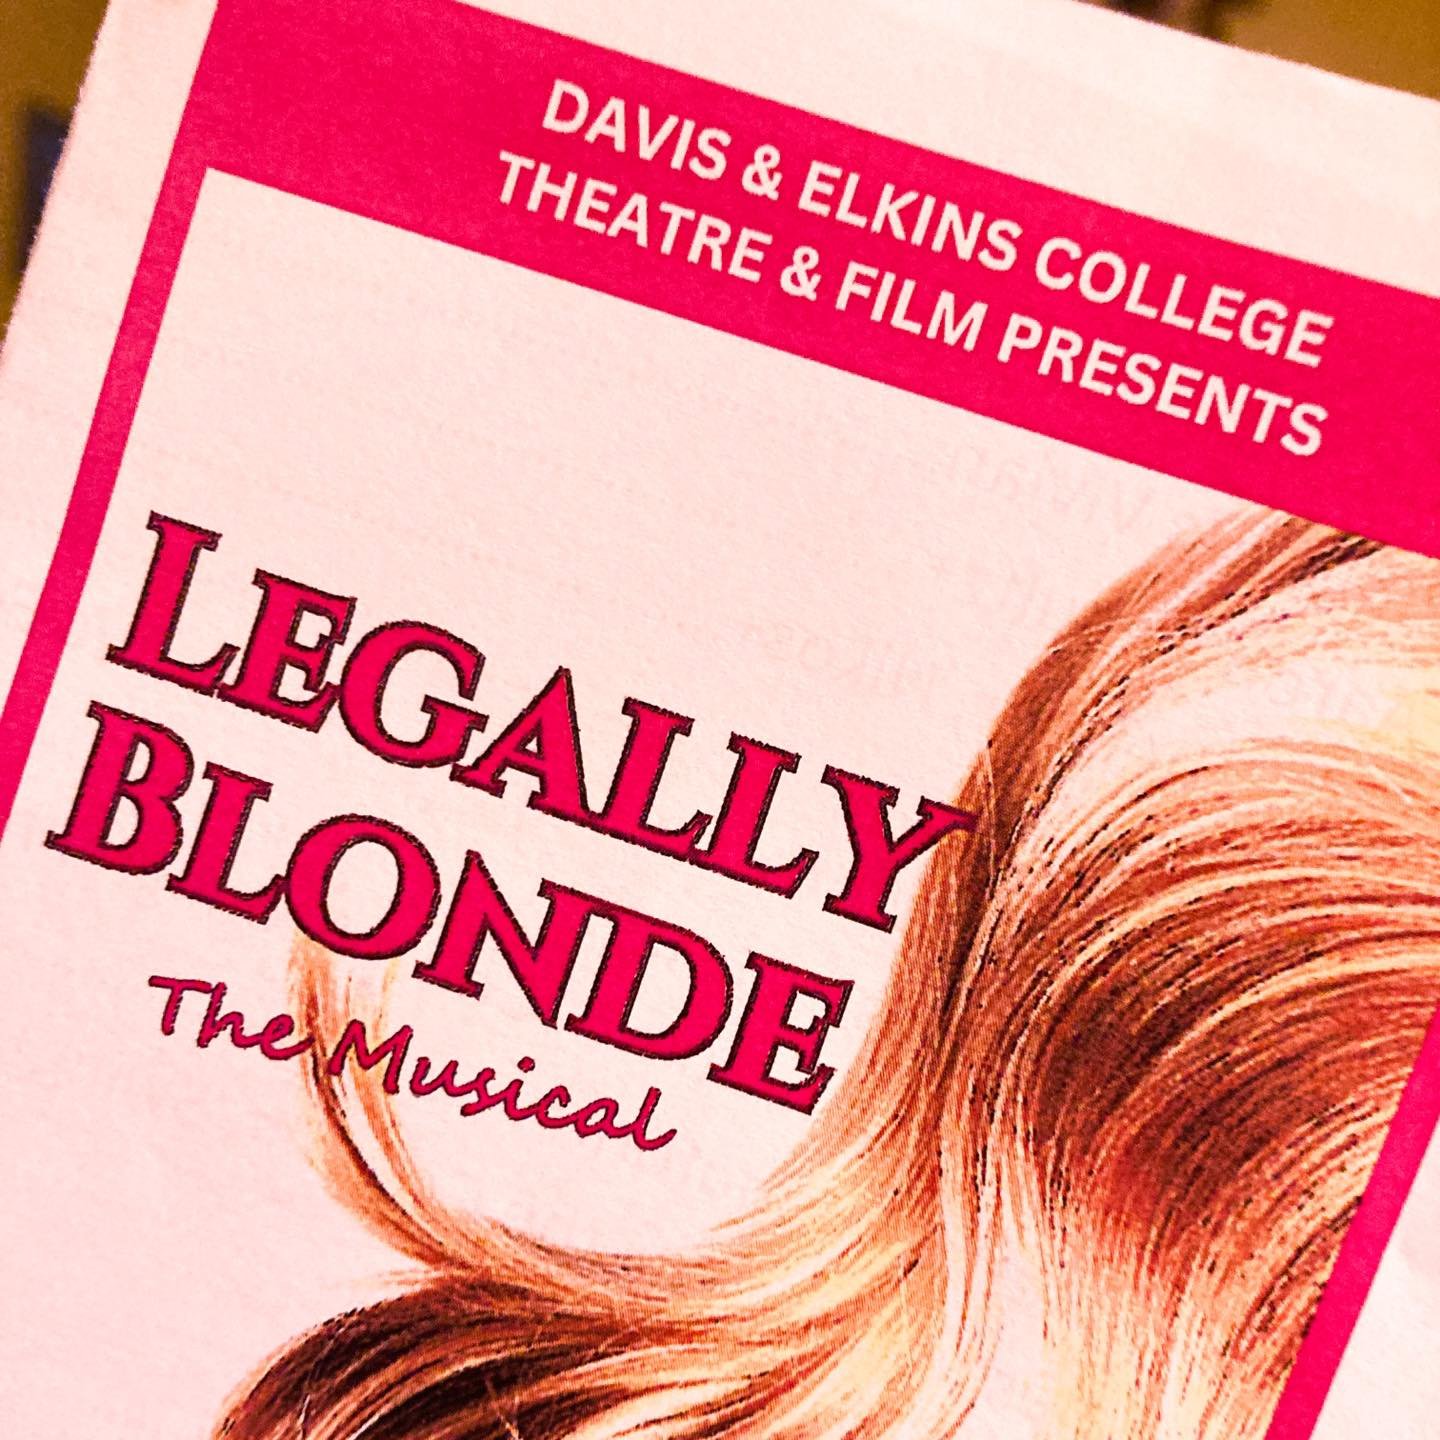 The Old Brick crew paid a visit to D&amp;E last night to see Legally Blonde: the Musical and had an amazing time!! A massive congratulations to our friends and alumni who brought this absolute riot to life, and an even bigger congratulations to our s